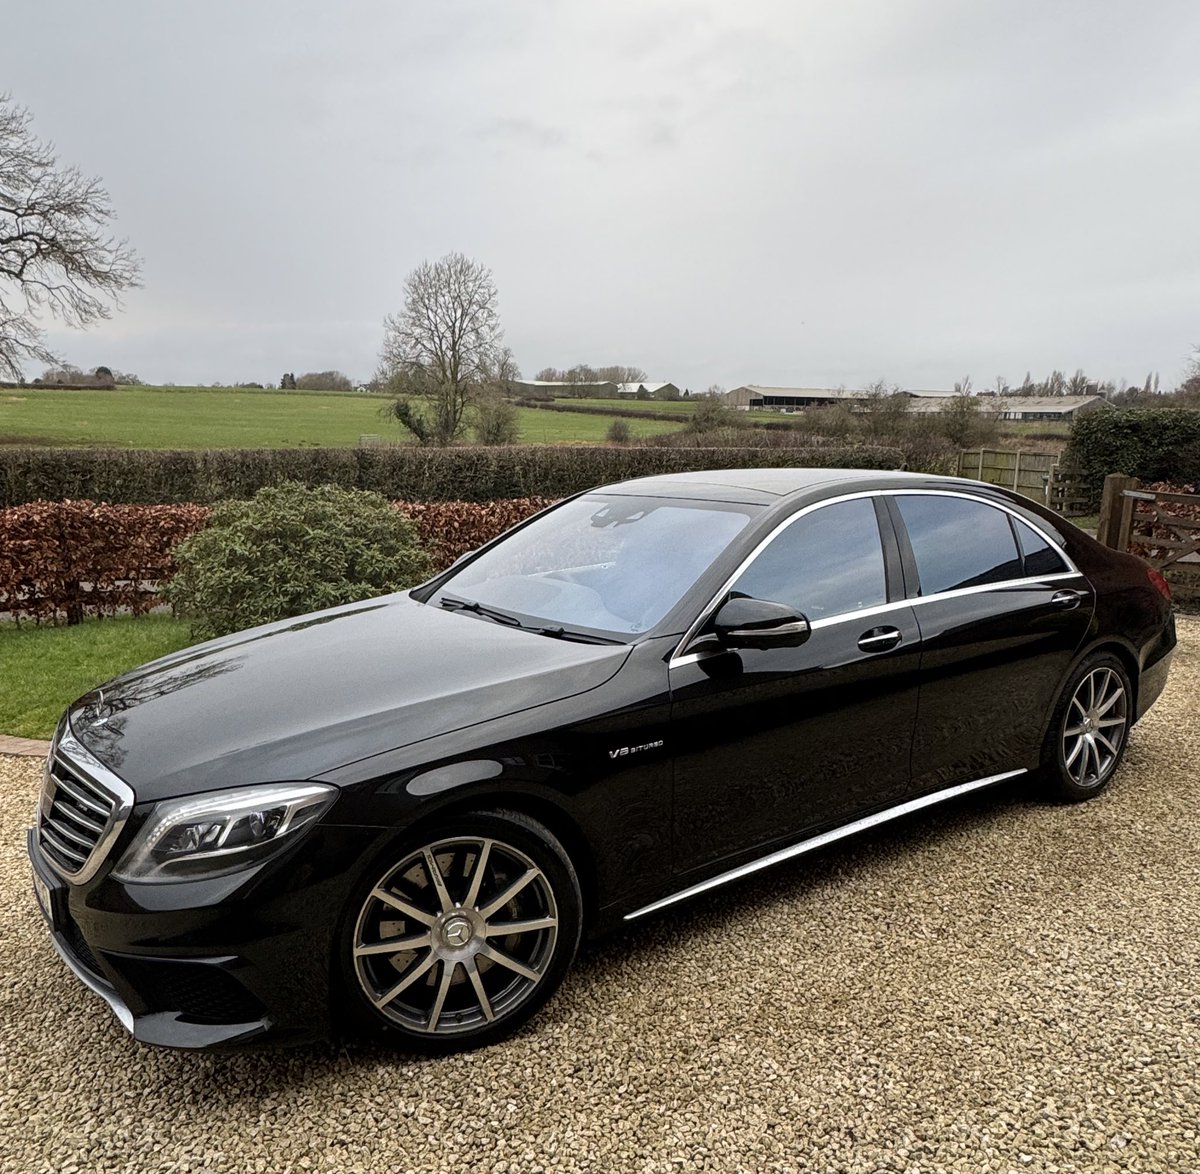 We’re incredibly fortunate to have this very high specification Mercedes S63L AMG in stock at the moment, but not as fortunate as the person who ends up buying it. Costing over 140k new this high performance model represents insane value today at only £32,995 WOW 🤩